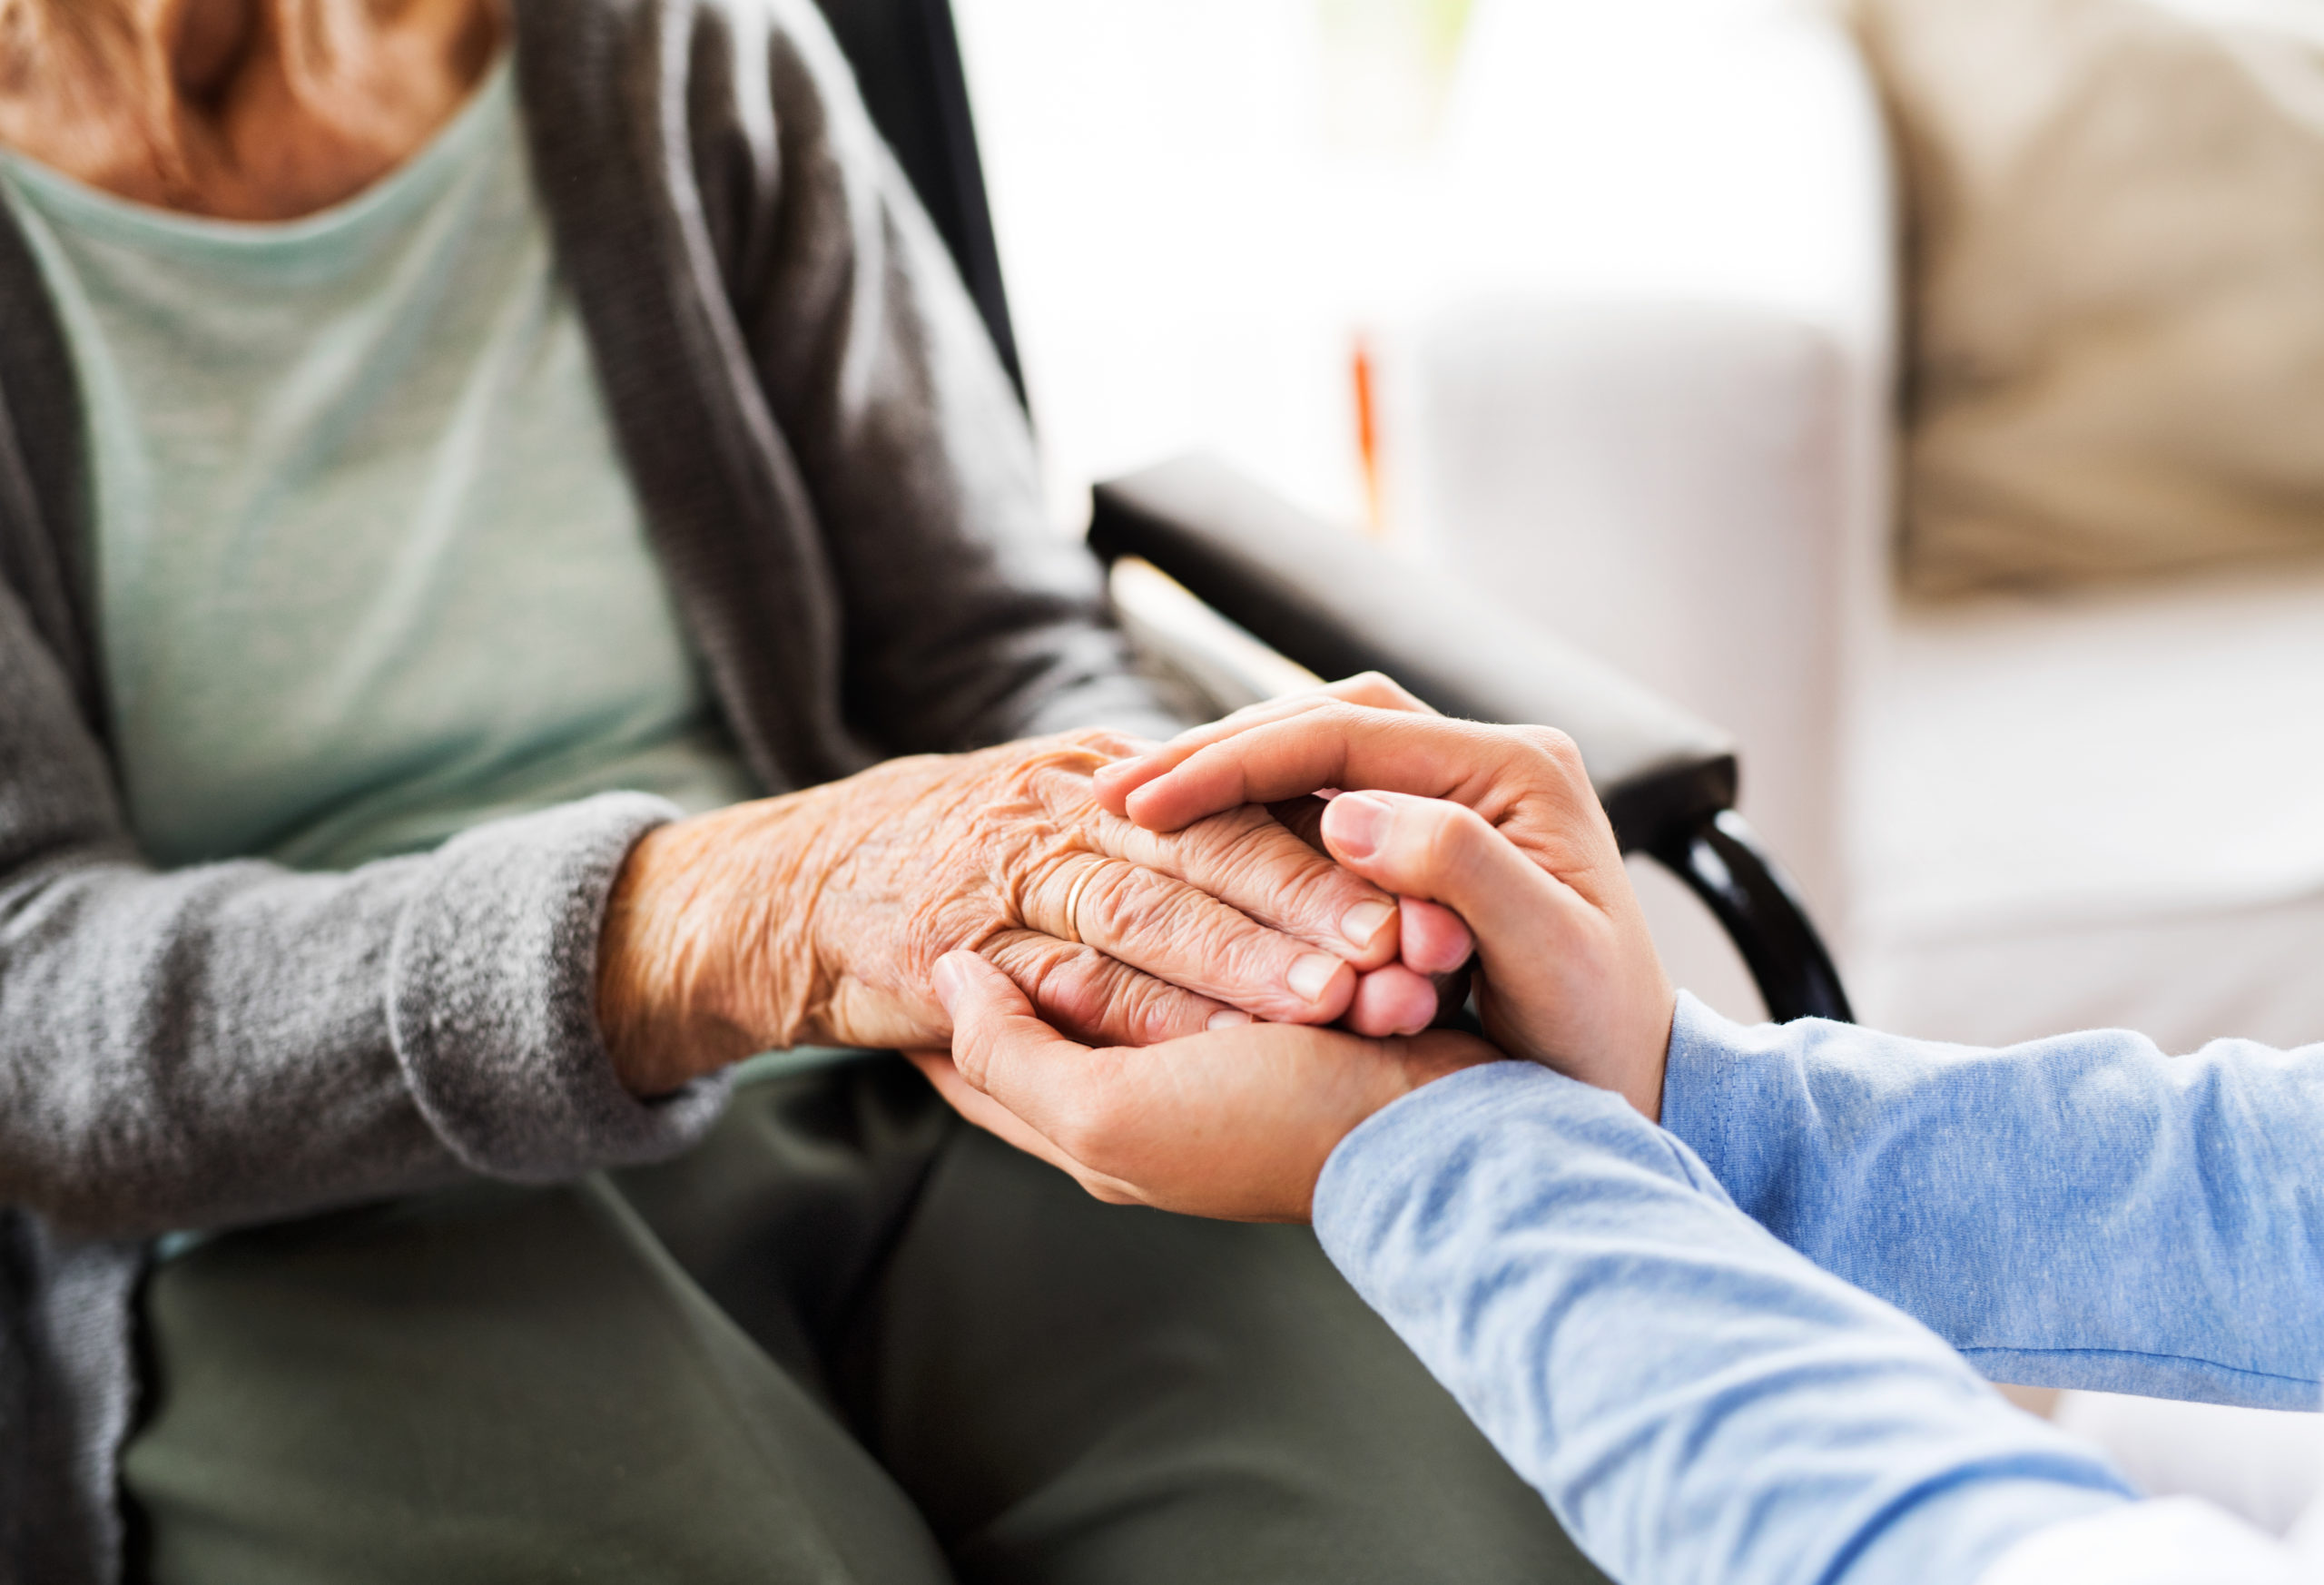 Blog - how intranets can support Care homes